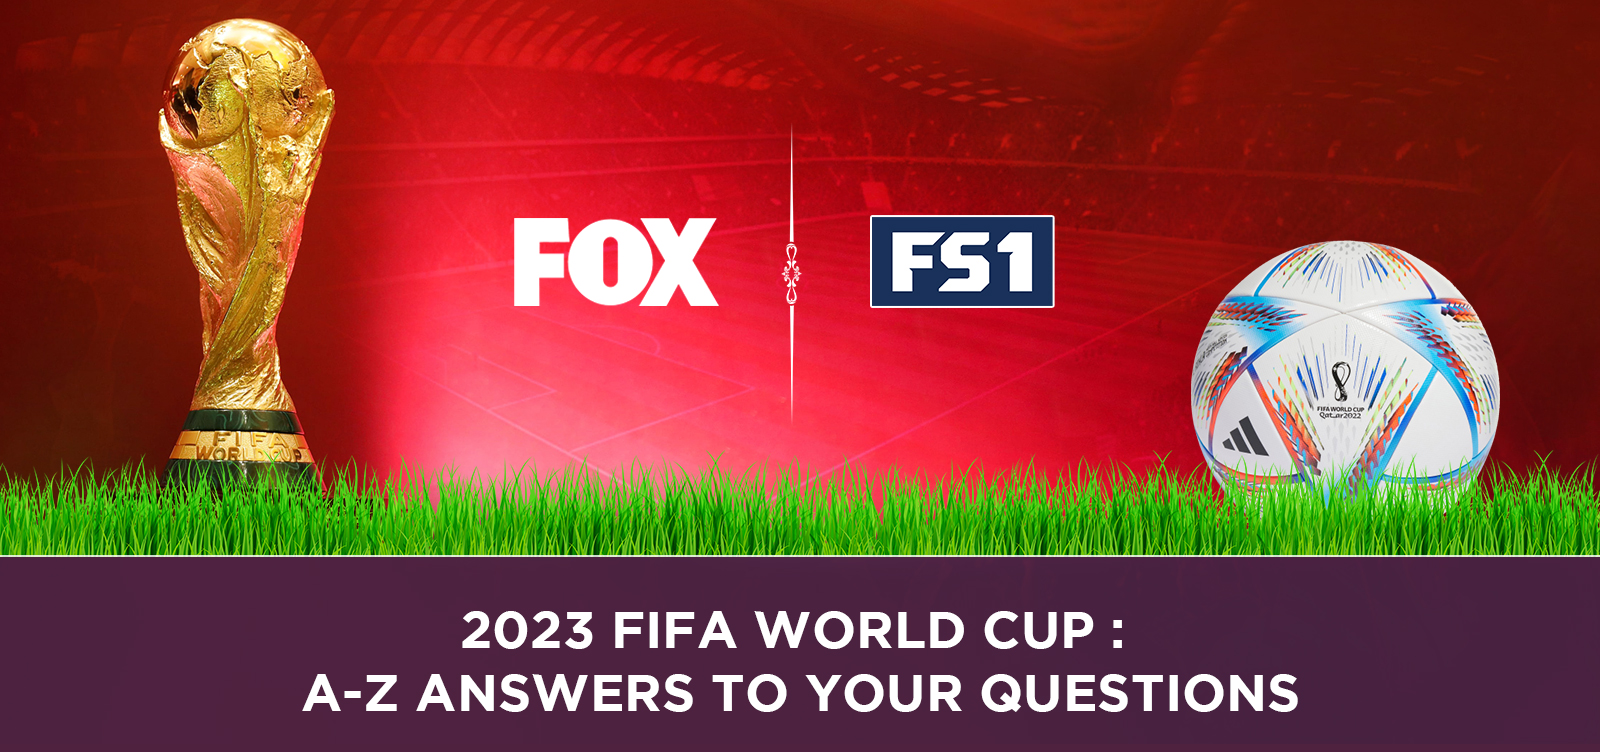 2023 FIFA World Cup: A-Z Answers to Your Questions